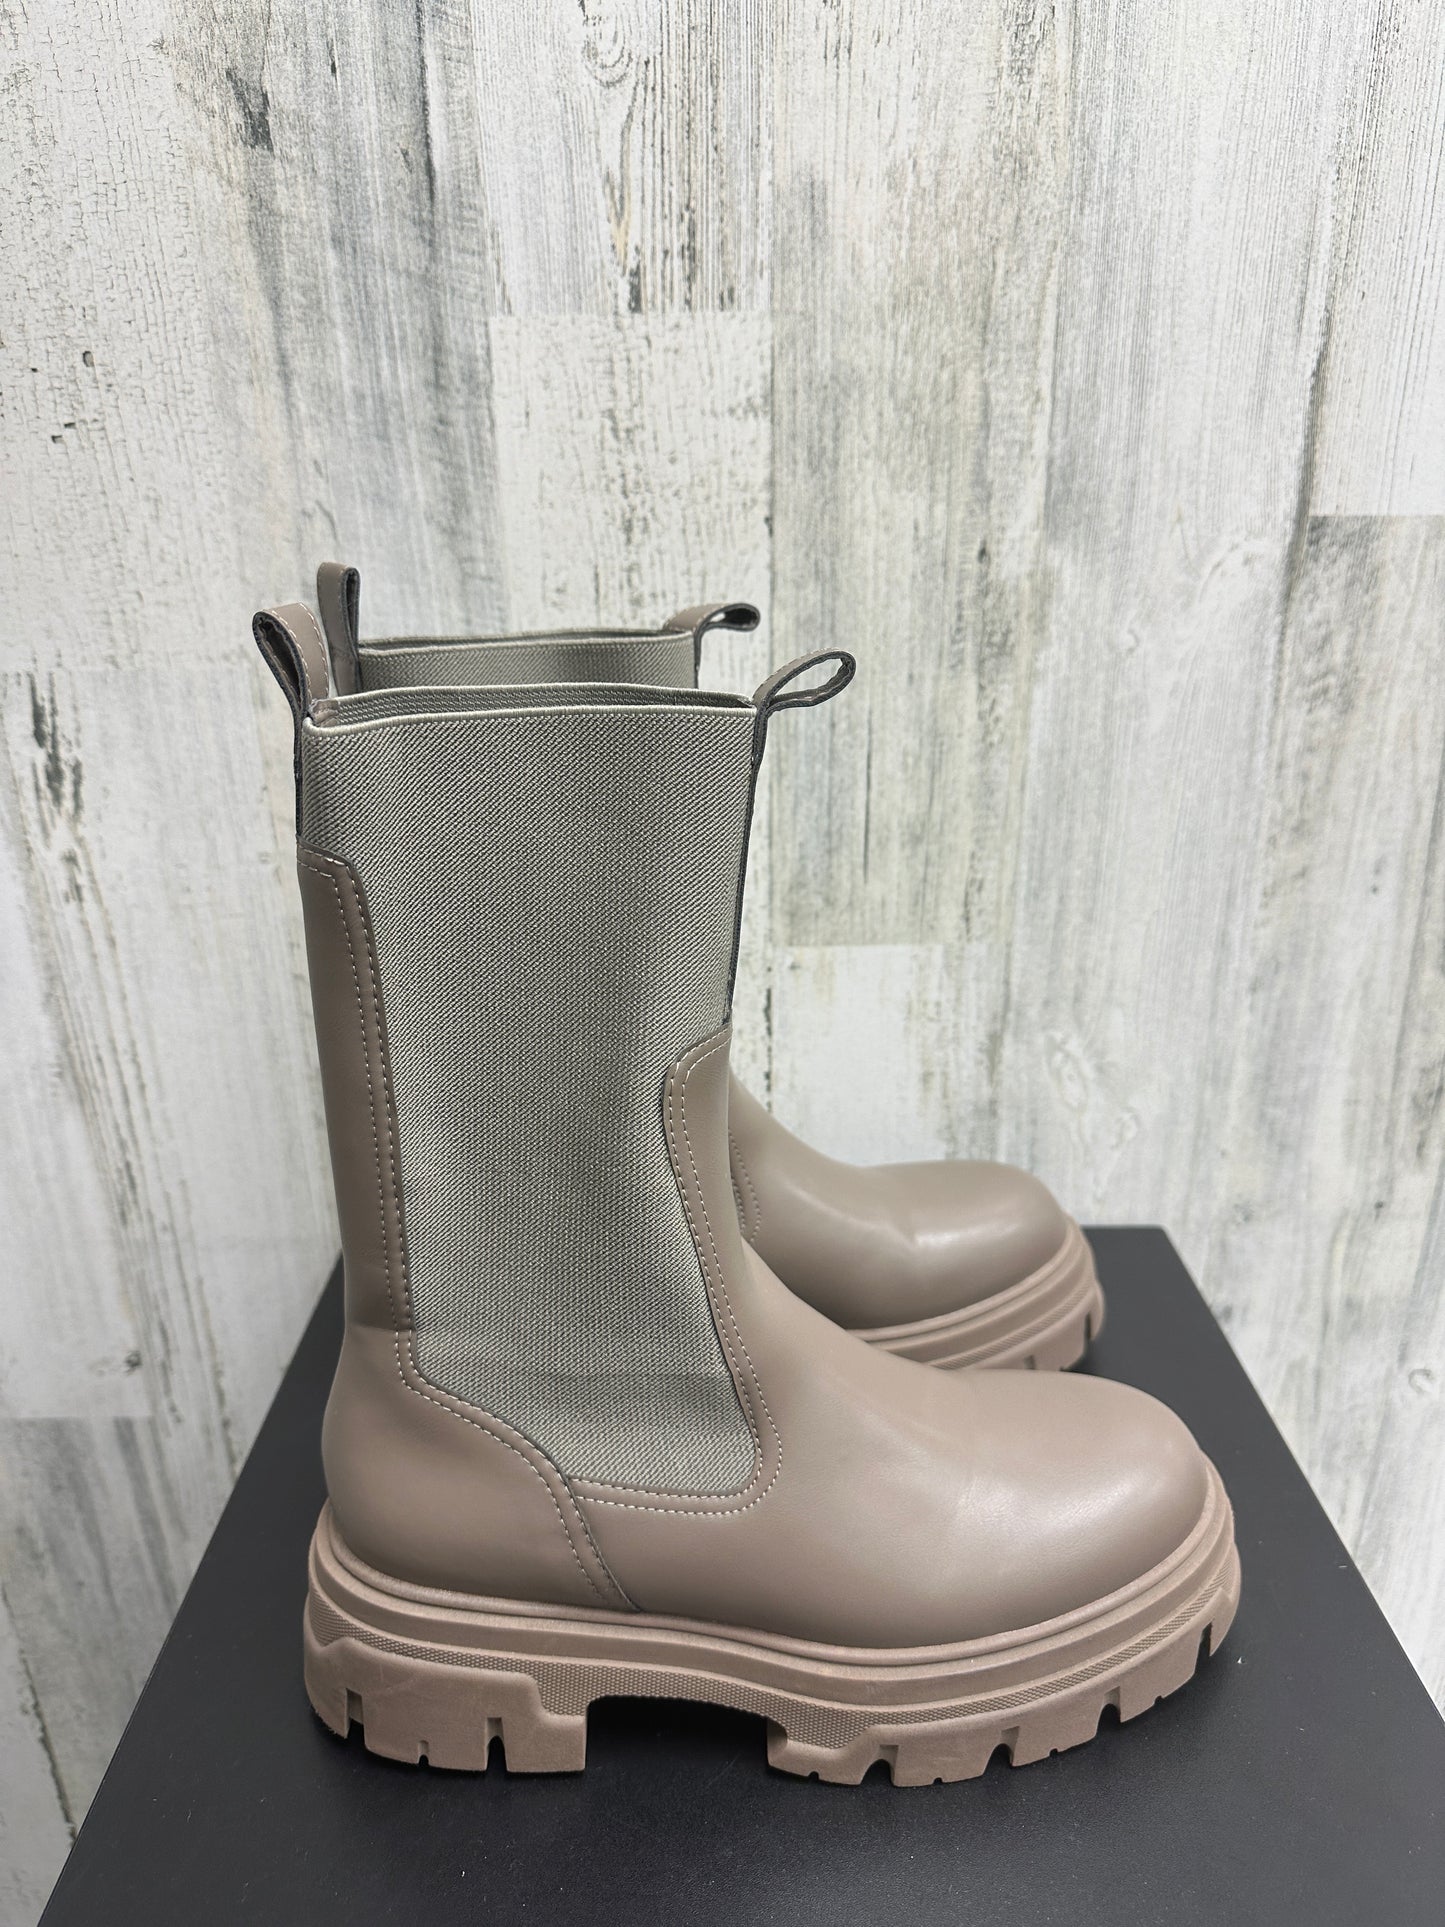 Boots Ankle Heels By H&m  Size: 8.5